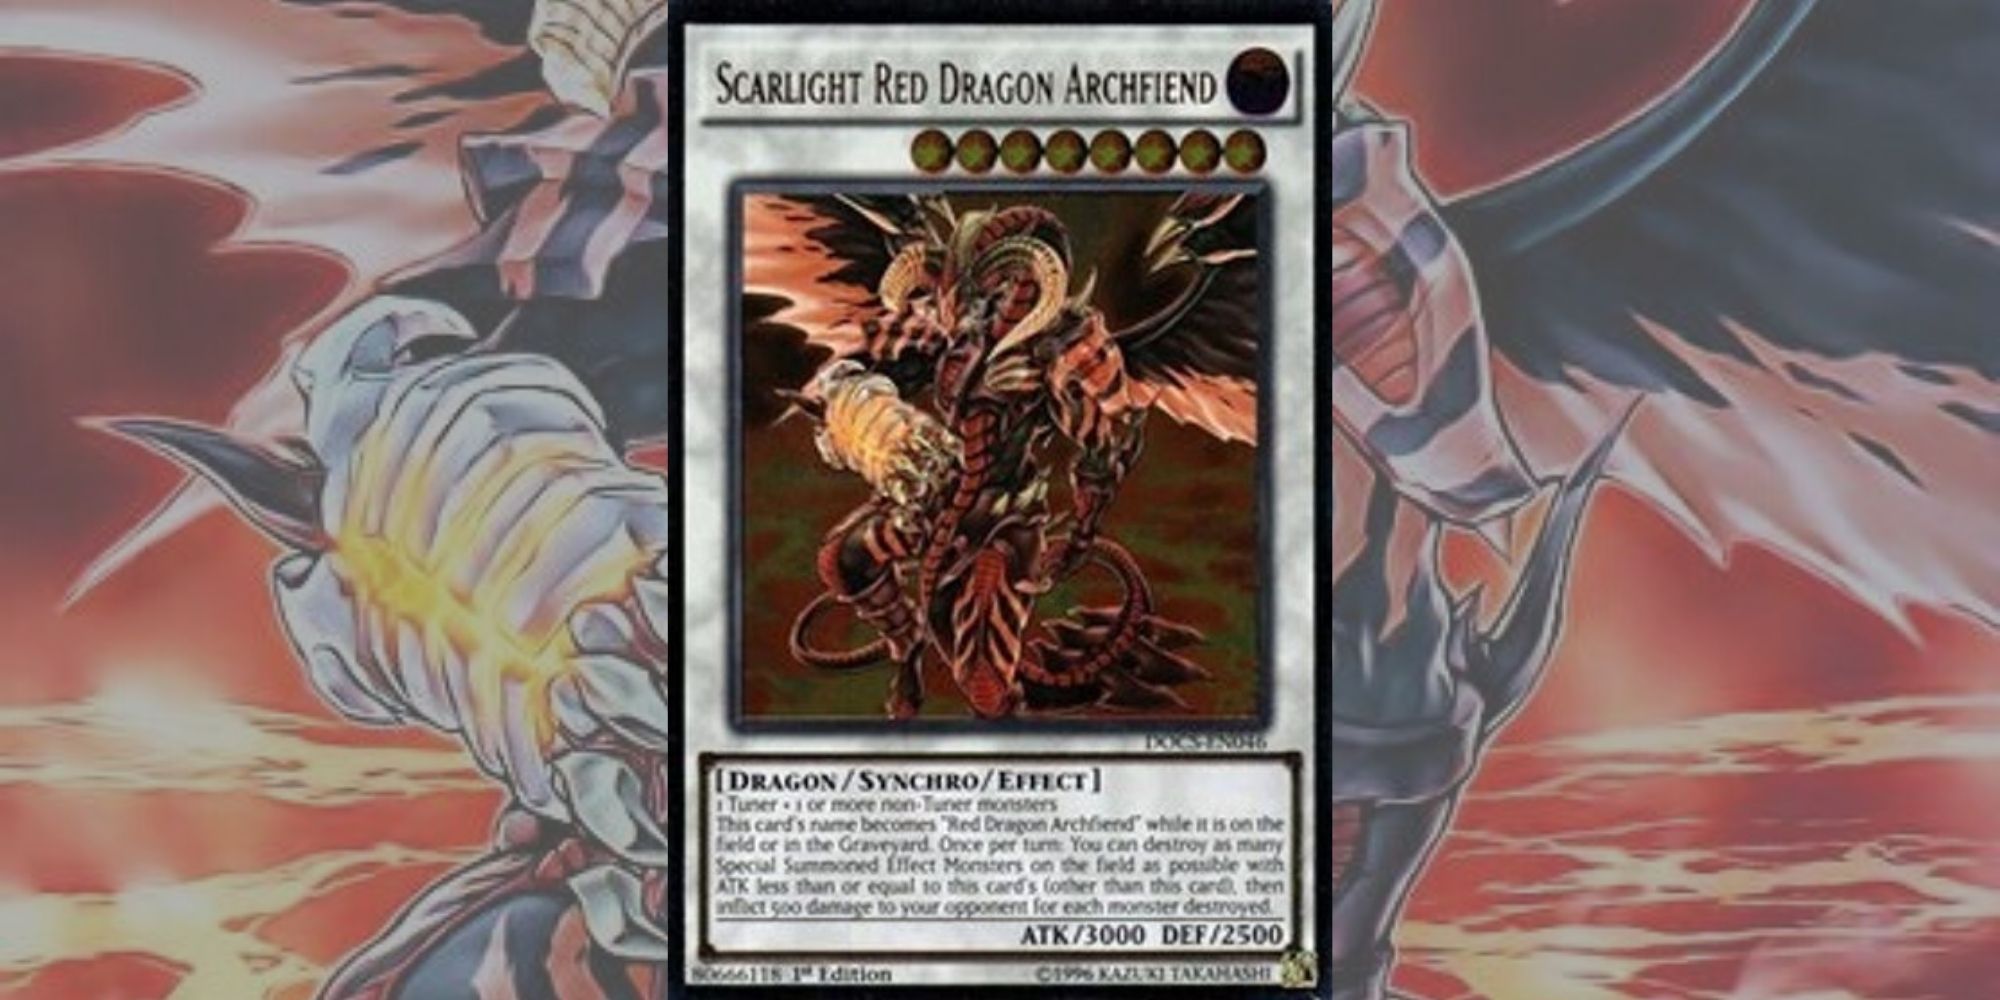 Yu-Gi-Oh! Card Scarlight Red-Dragon Archfiend against background made from card art.